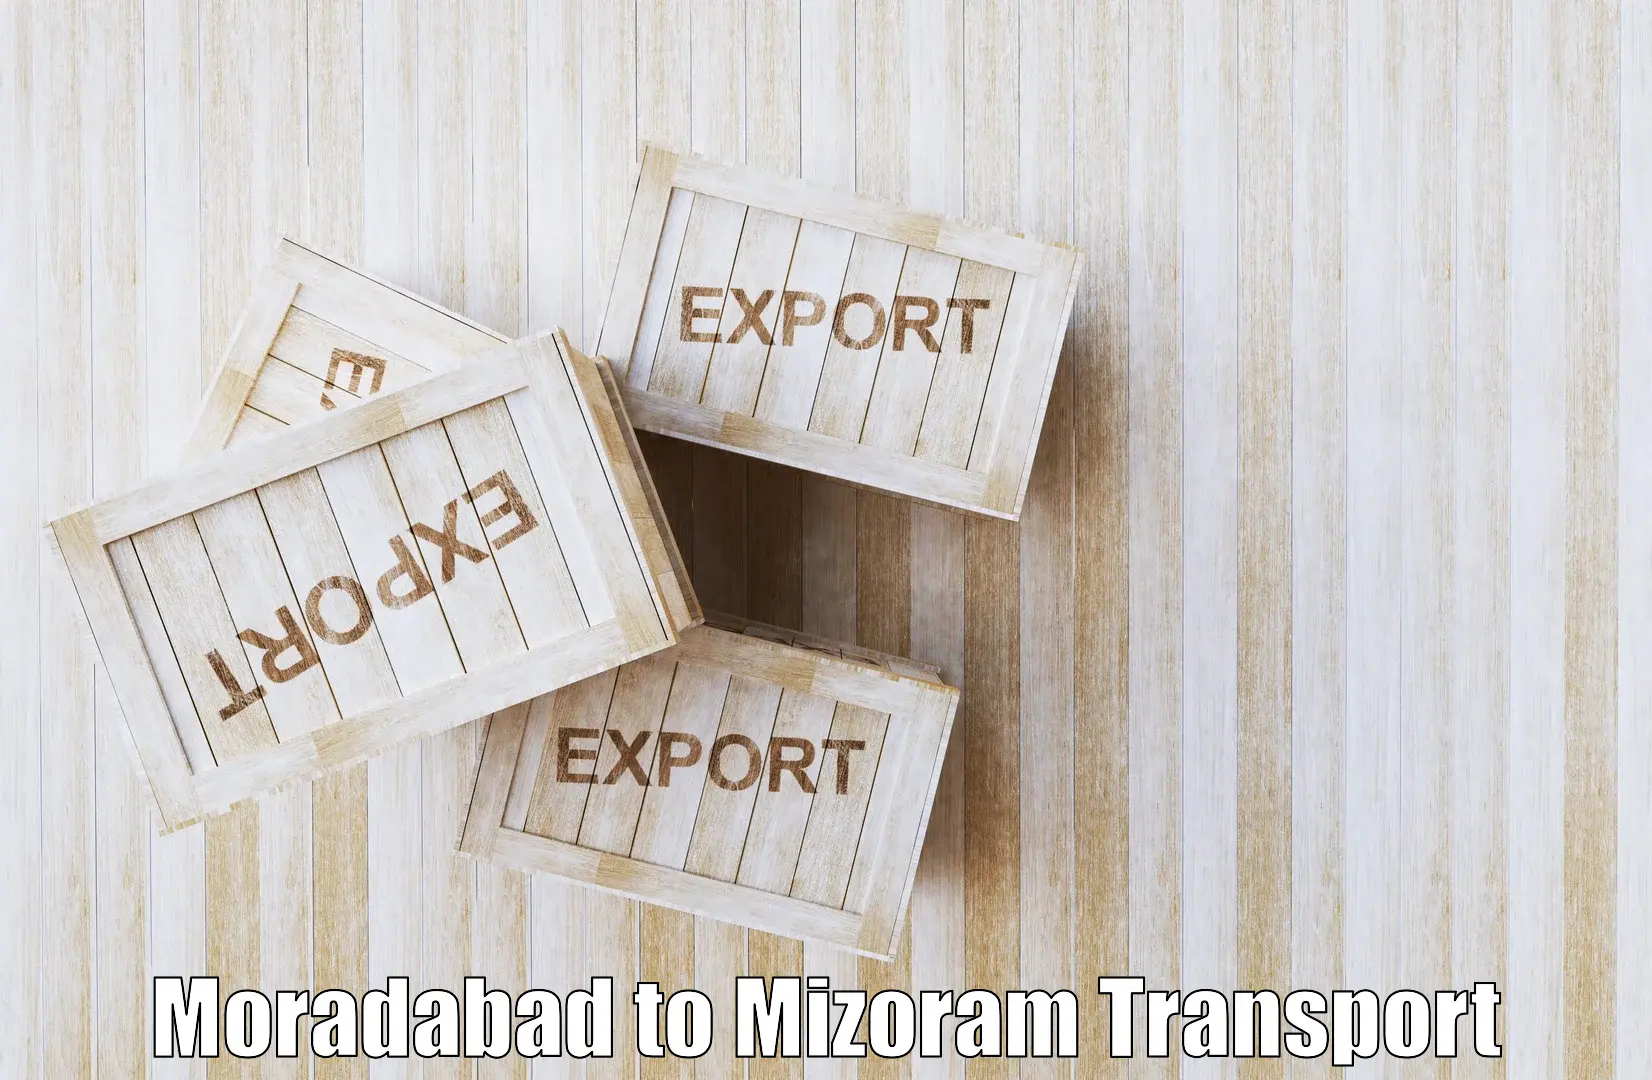 Vehicle transport services in Moradabad to Siaha